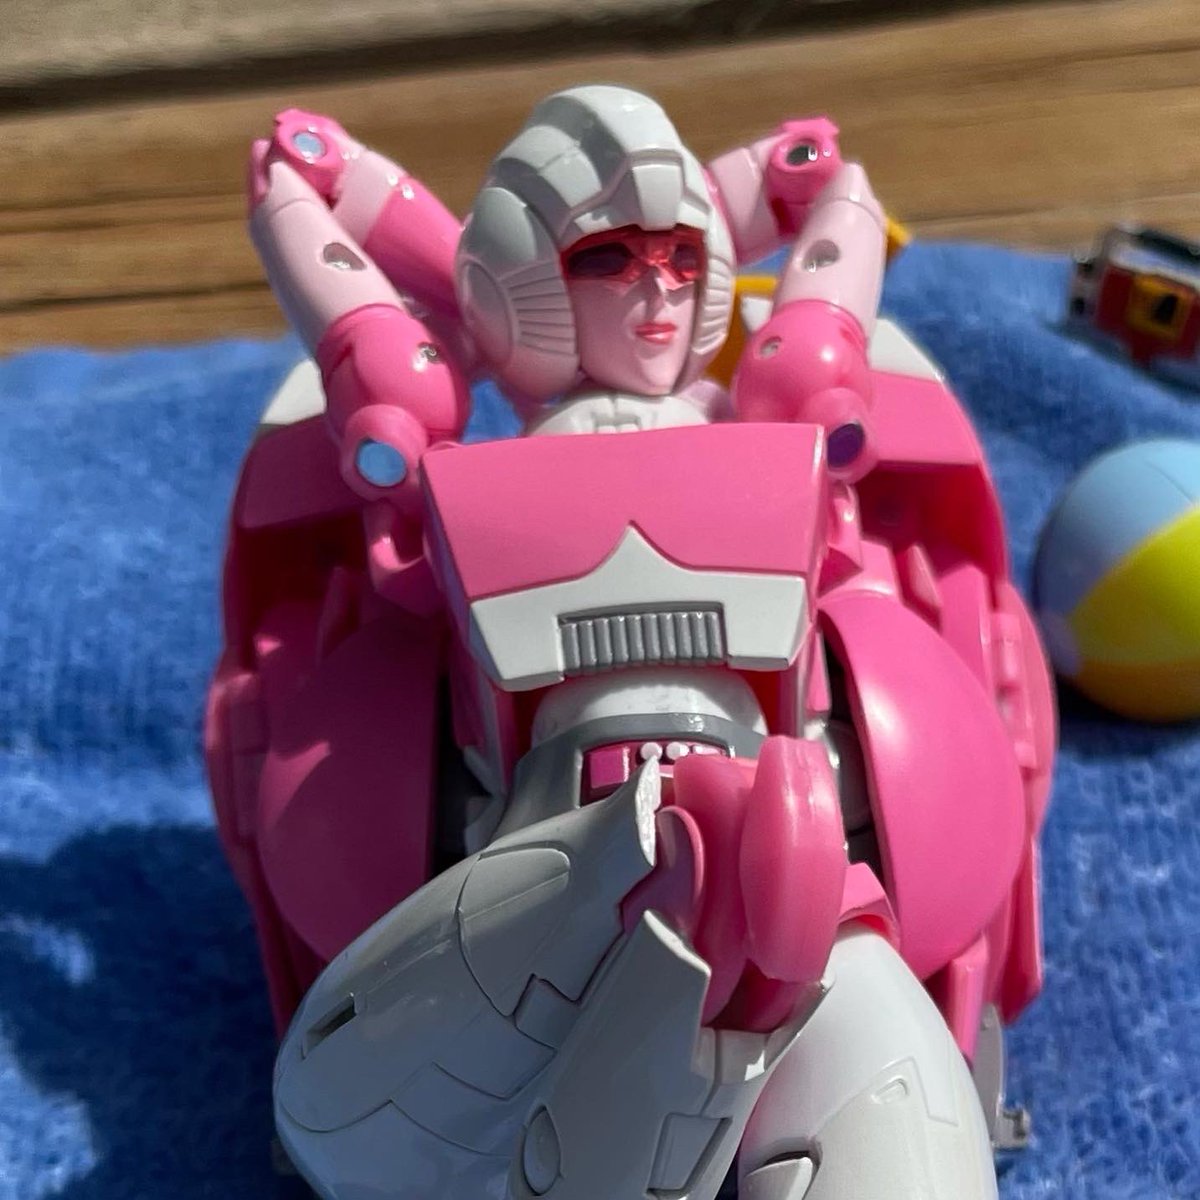 Missing Summer vacation about now…

#Transformers #toys #80cartoons #actionfigures #toypics #Autobots #Morethanmeetstheeye #MoreMasterpiece #summertime